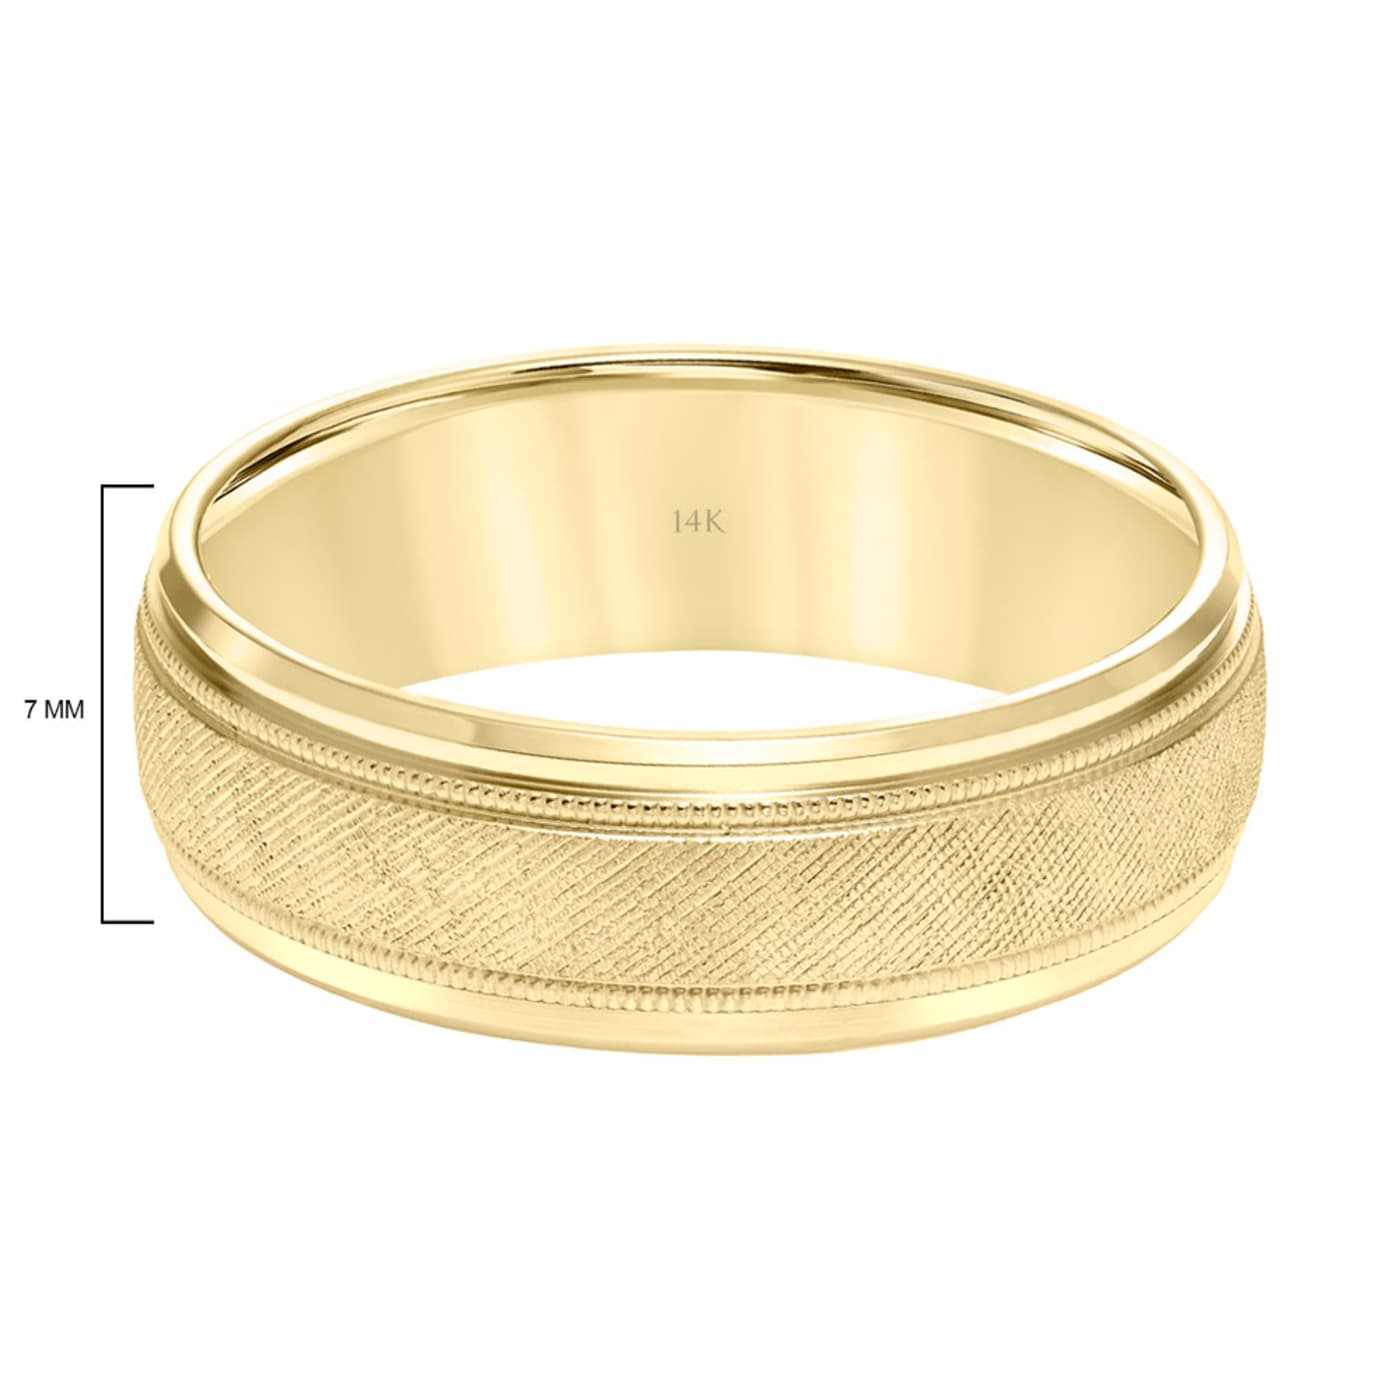 Brilliant Milgrain - with Band Yellow Expressions Accents 14K 7MM Florentine Gold 1STGPA by Finish Wedding